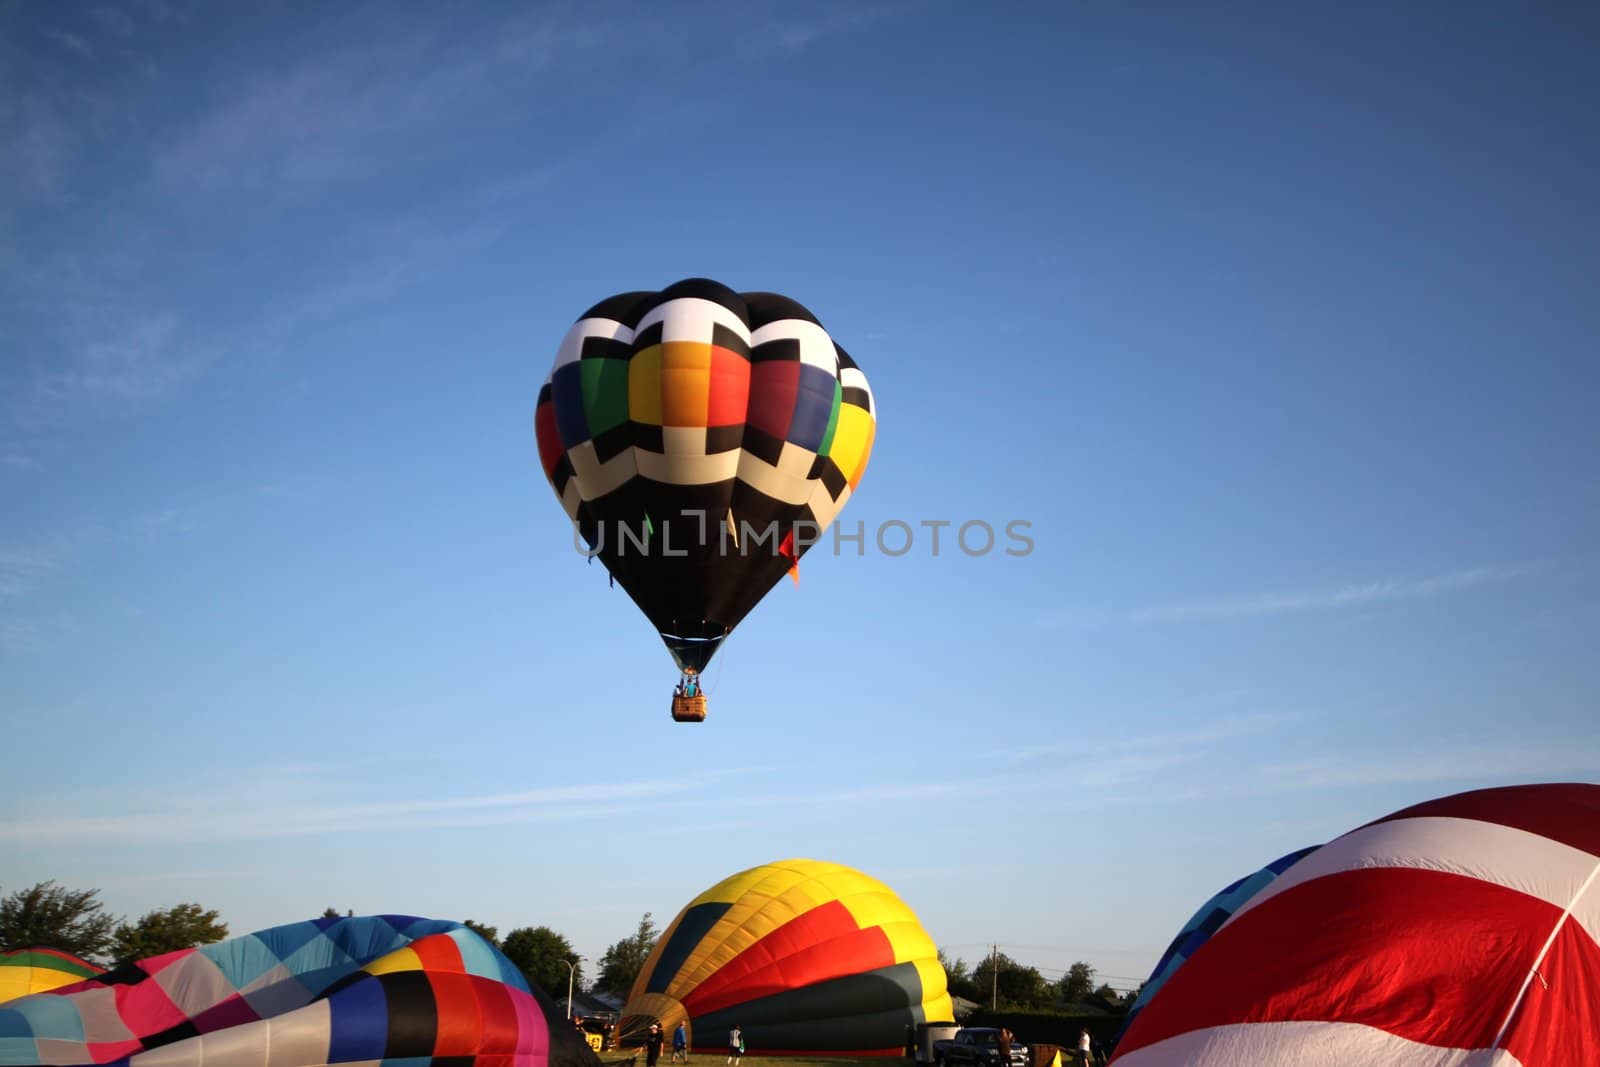 Hot air balloons getting ready to take off